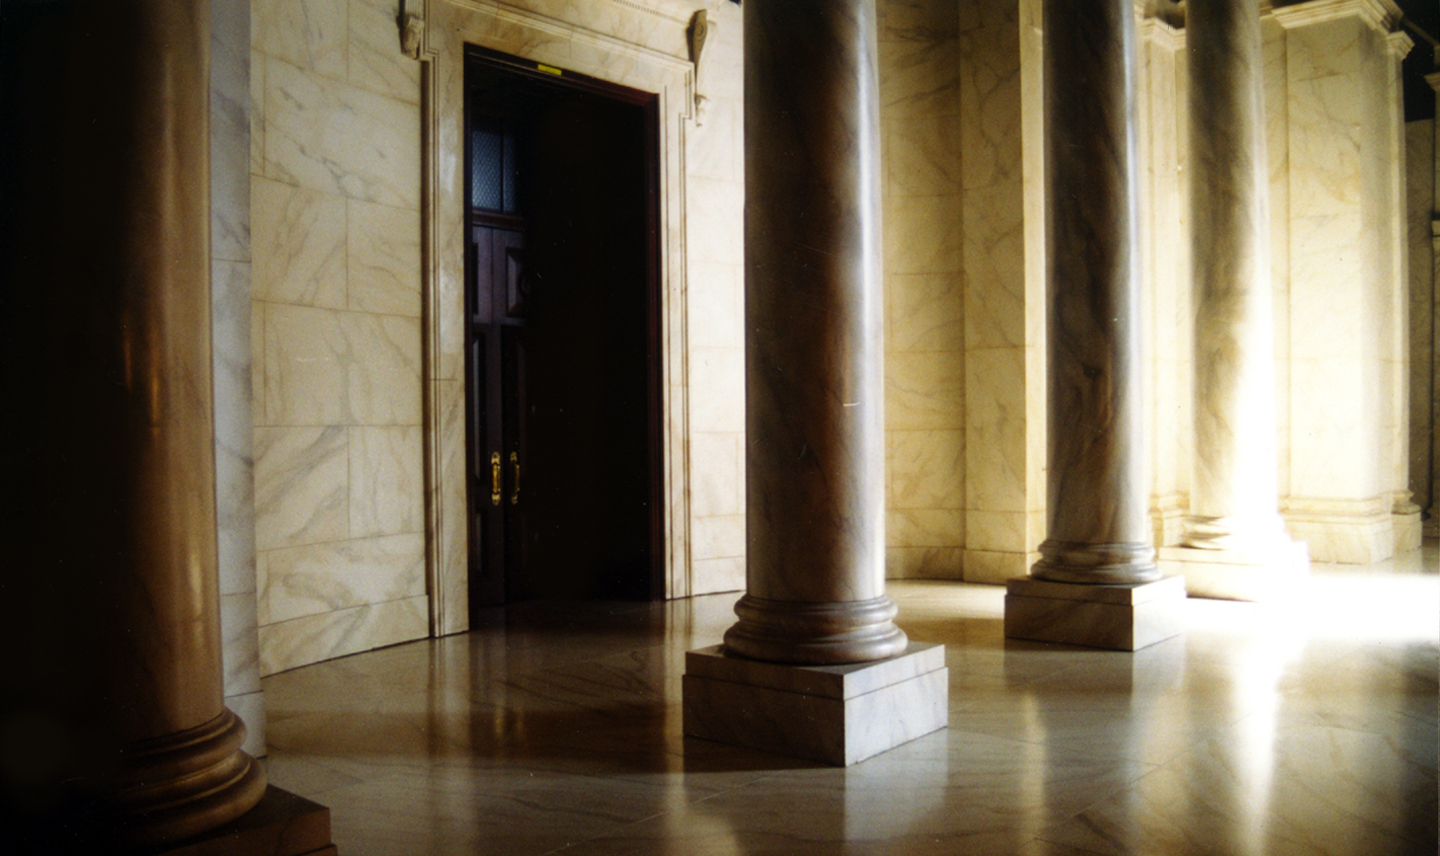 The Court - Courtroom Lobby